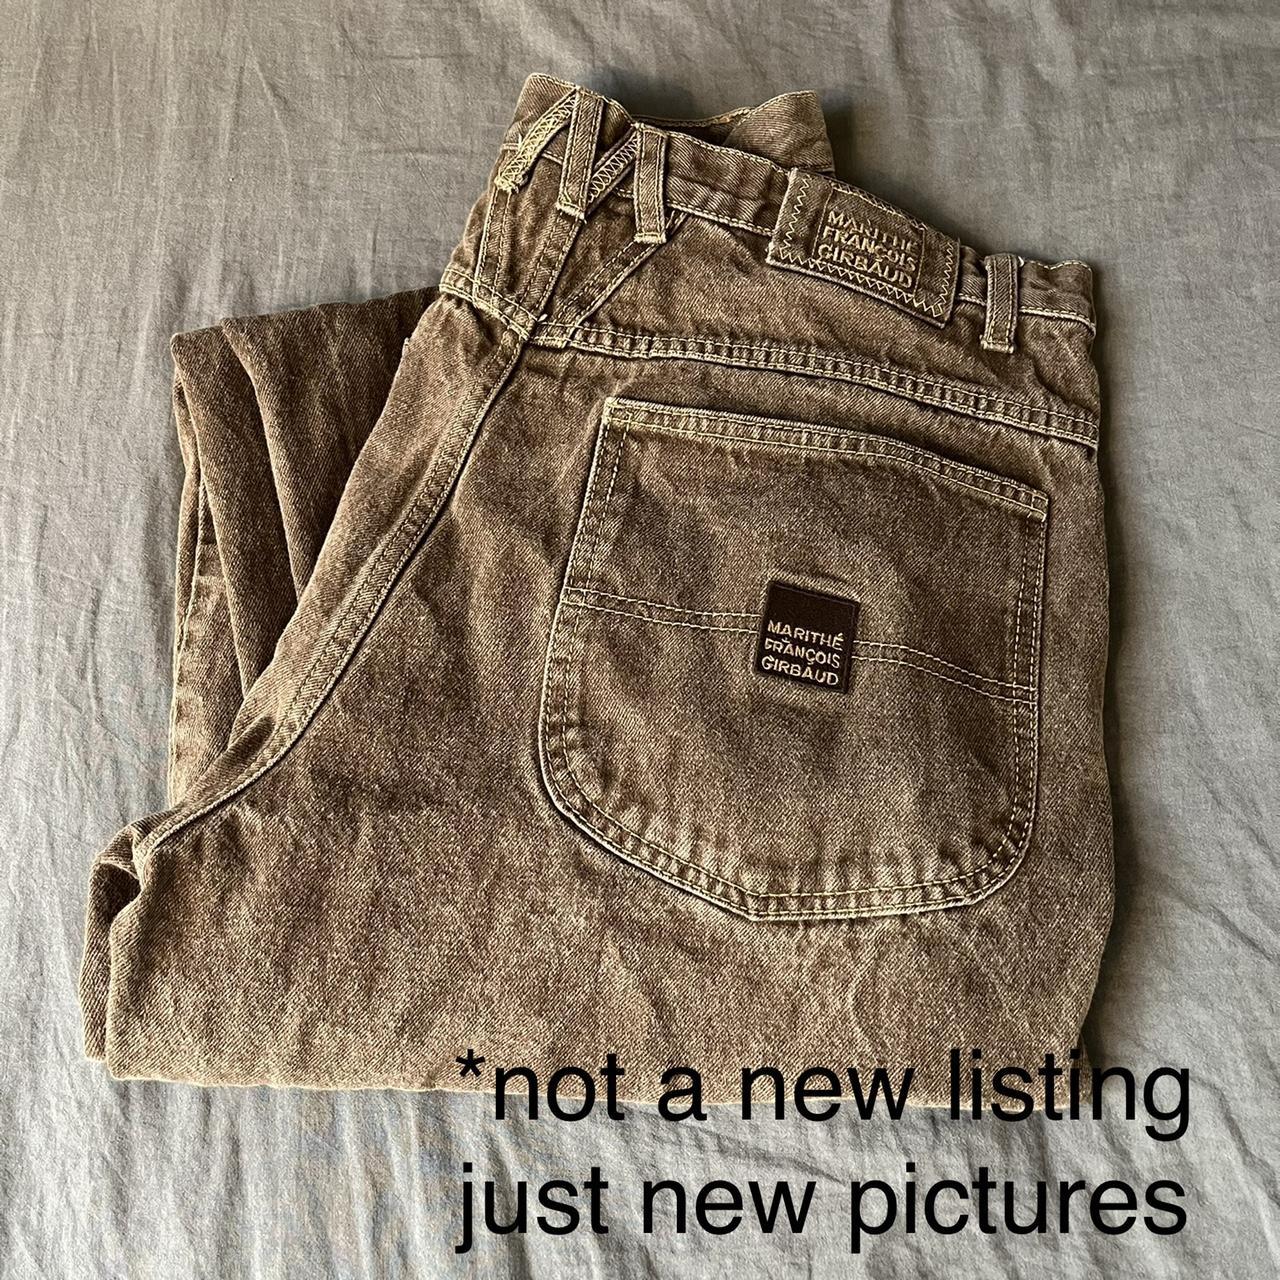 Walging Ontwapening Luxe Le Jean de Marithe Francois Girbaud Men's Tan and Brown Jeans | Depop